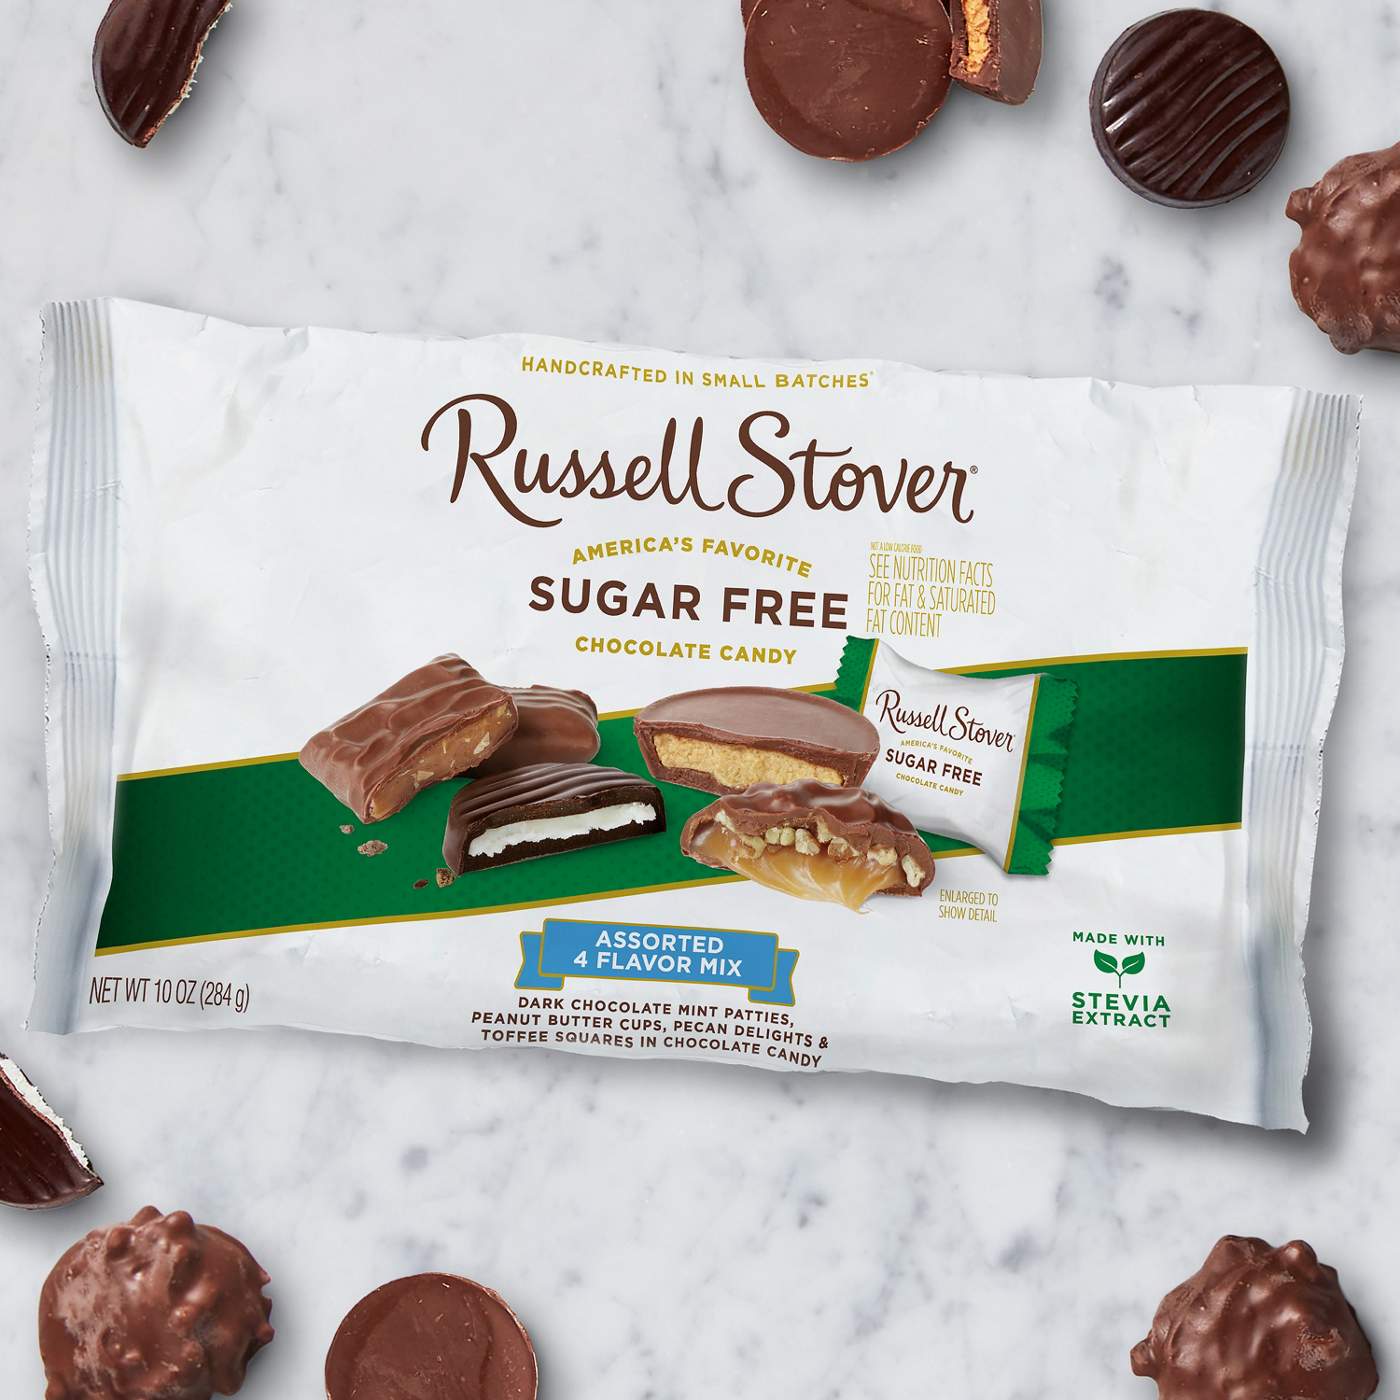 Russell Stover Sugar Free Assorted 4 Flavor Mix Candies; image 2 of 4